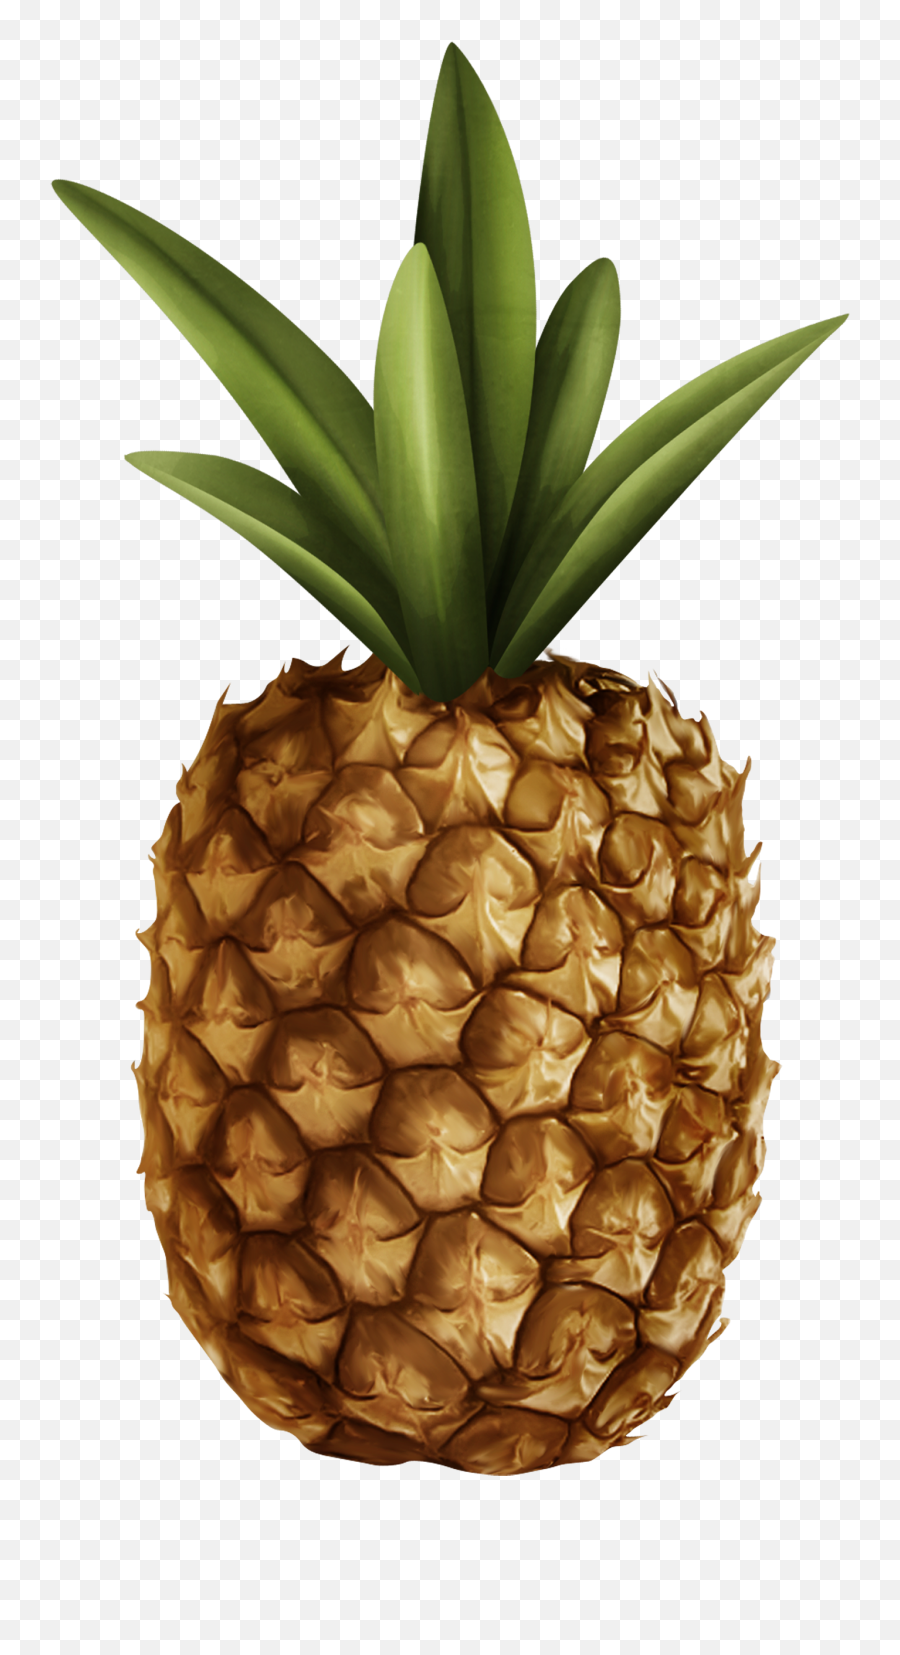 Pineapple Clipart Web - Pineapple Clipart Png Emoji,Pineapple Clipart